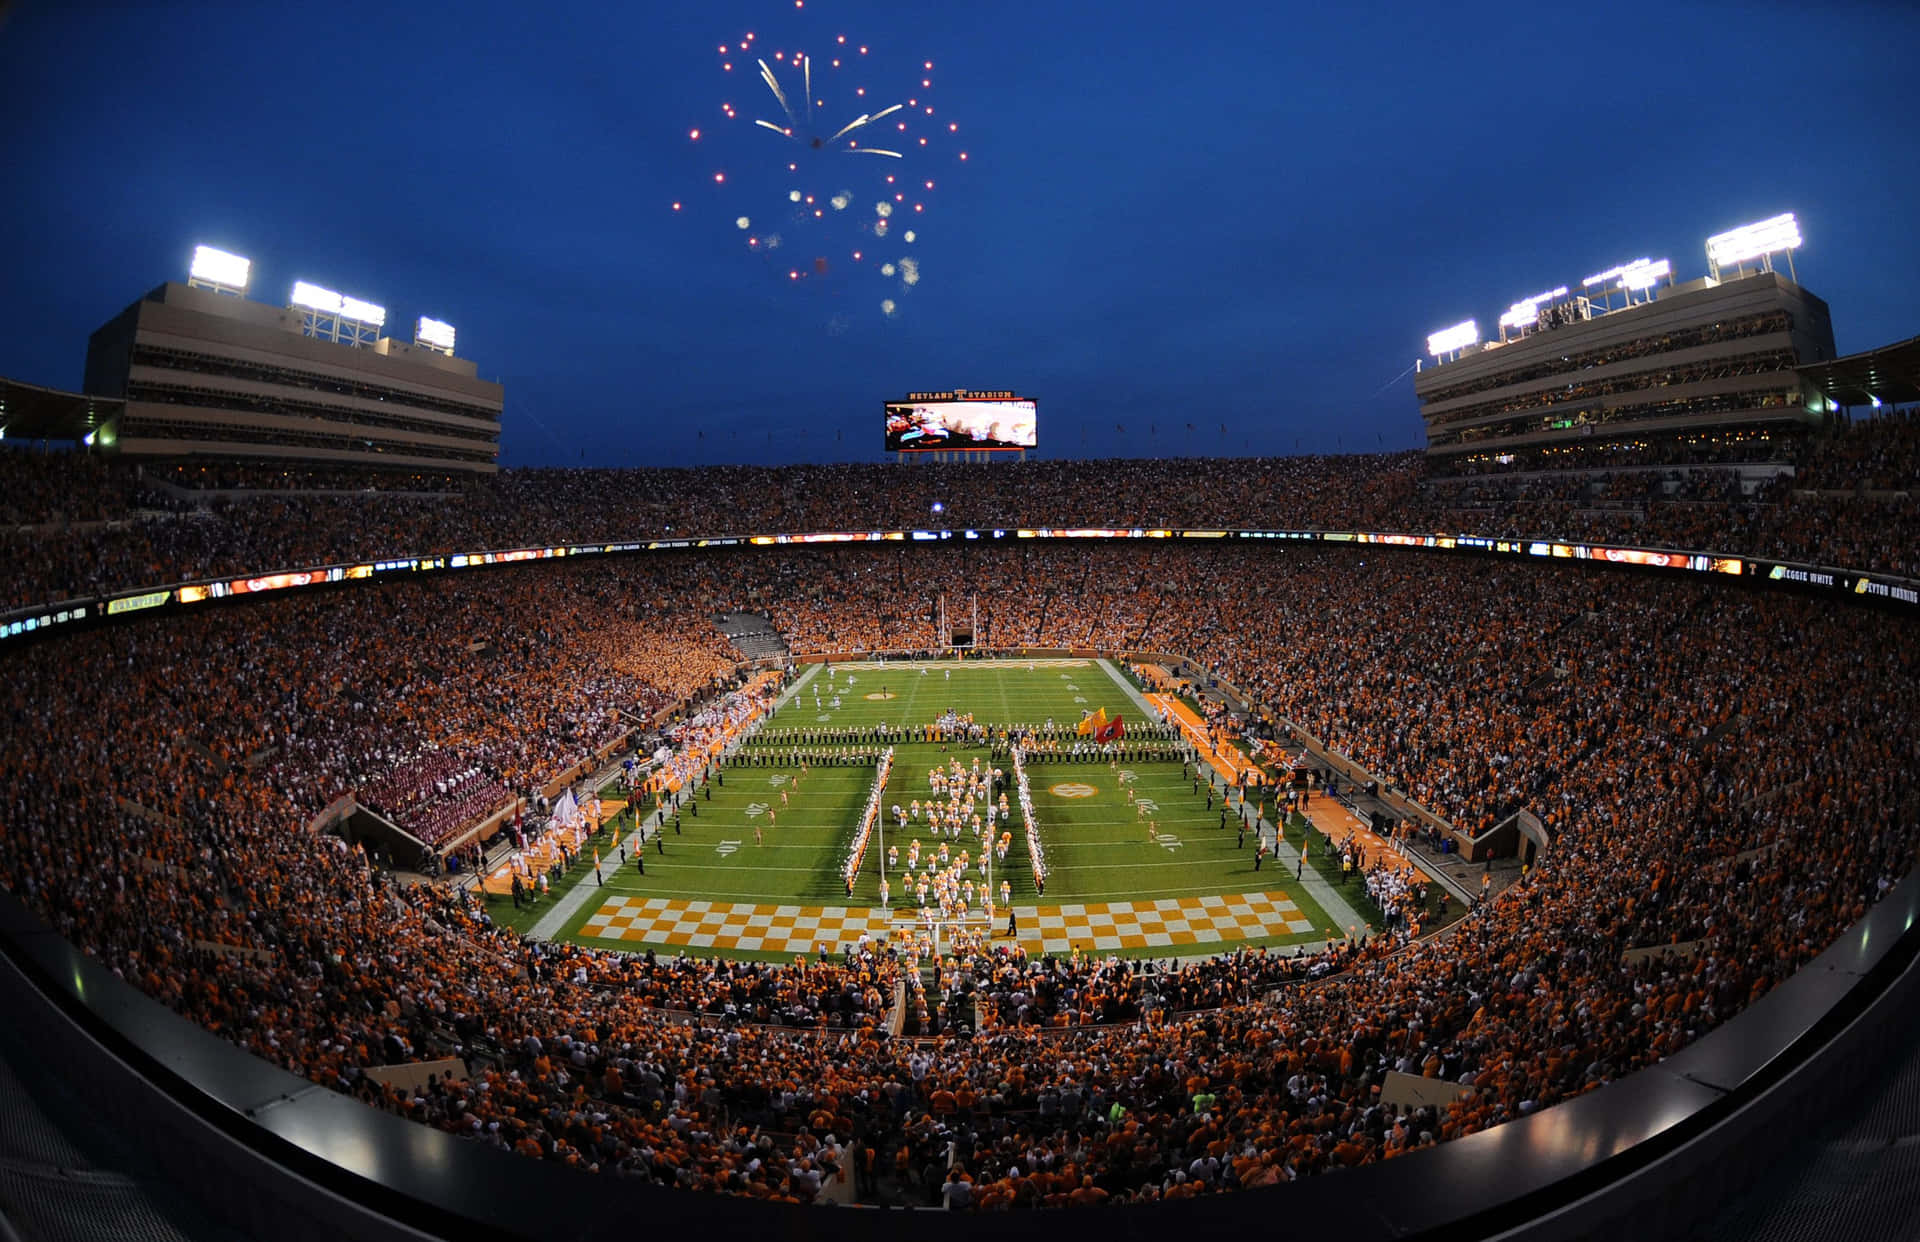 Show your pride with this Tennessee Volunteers wallpaper! Wallpaper